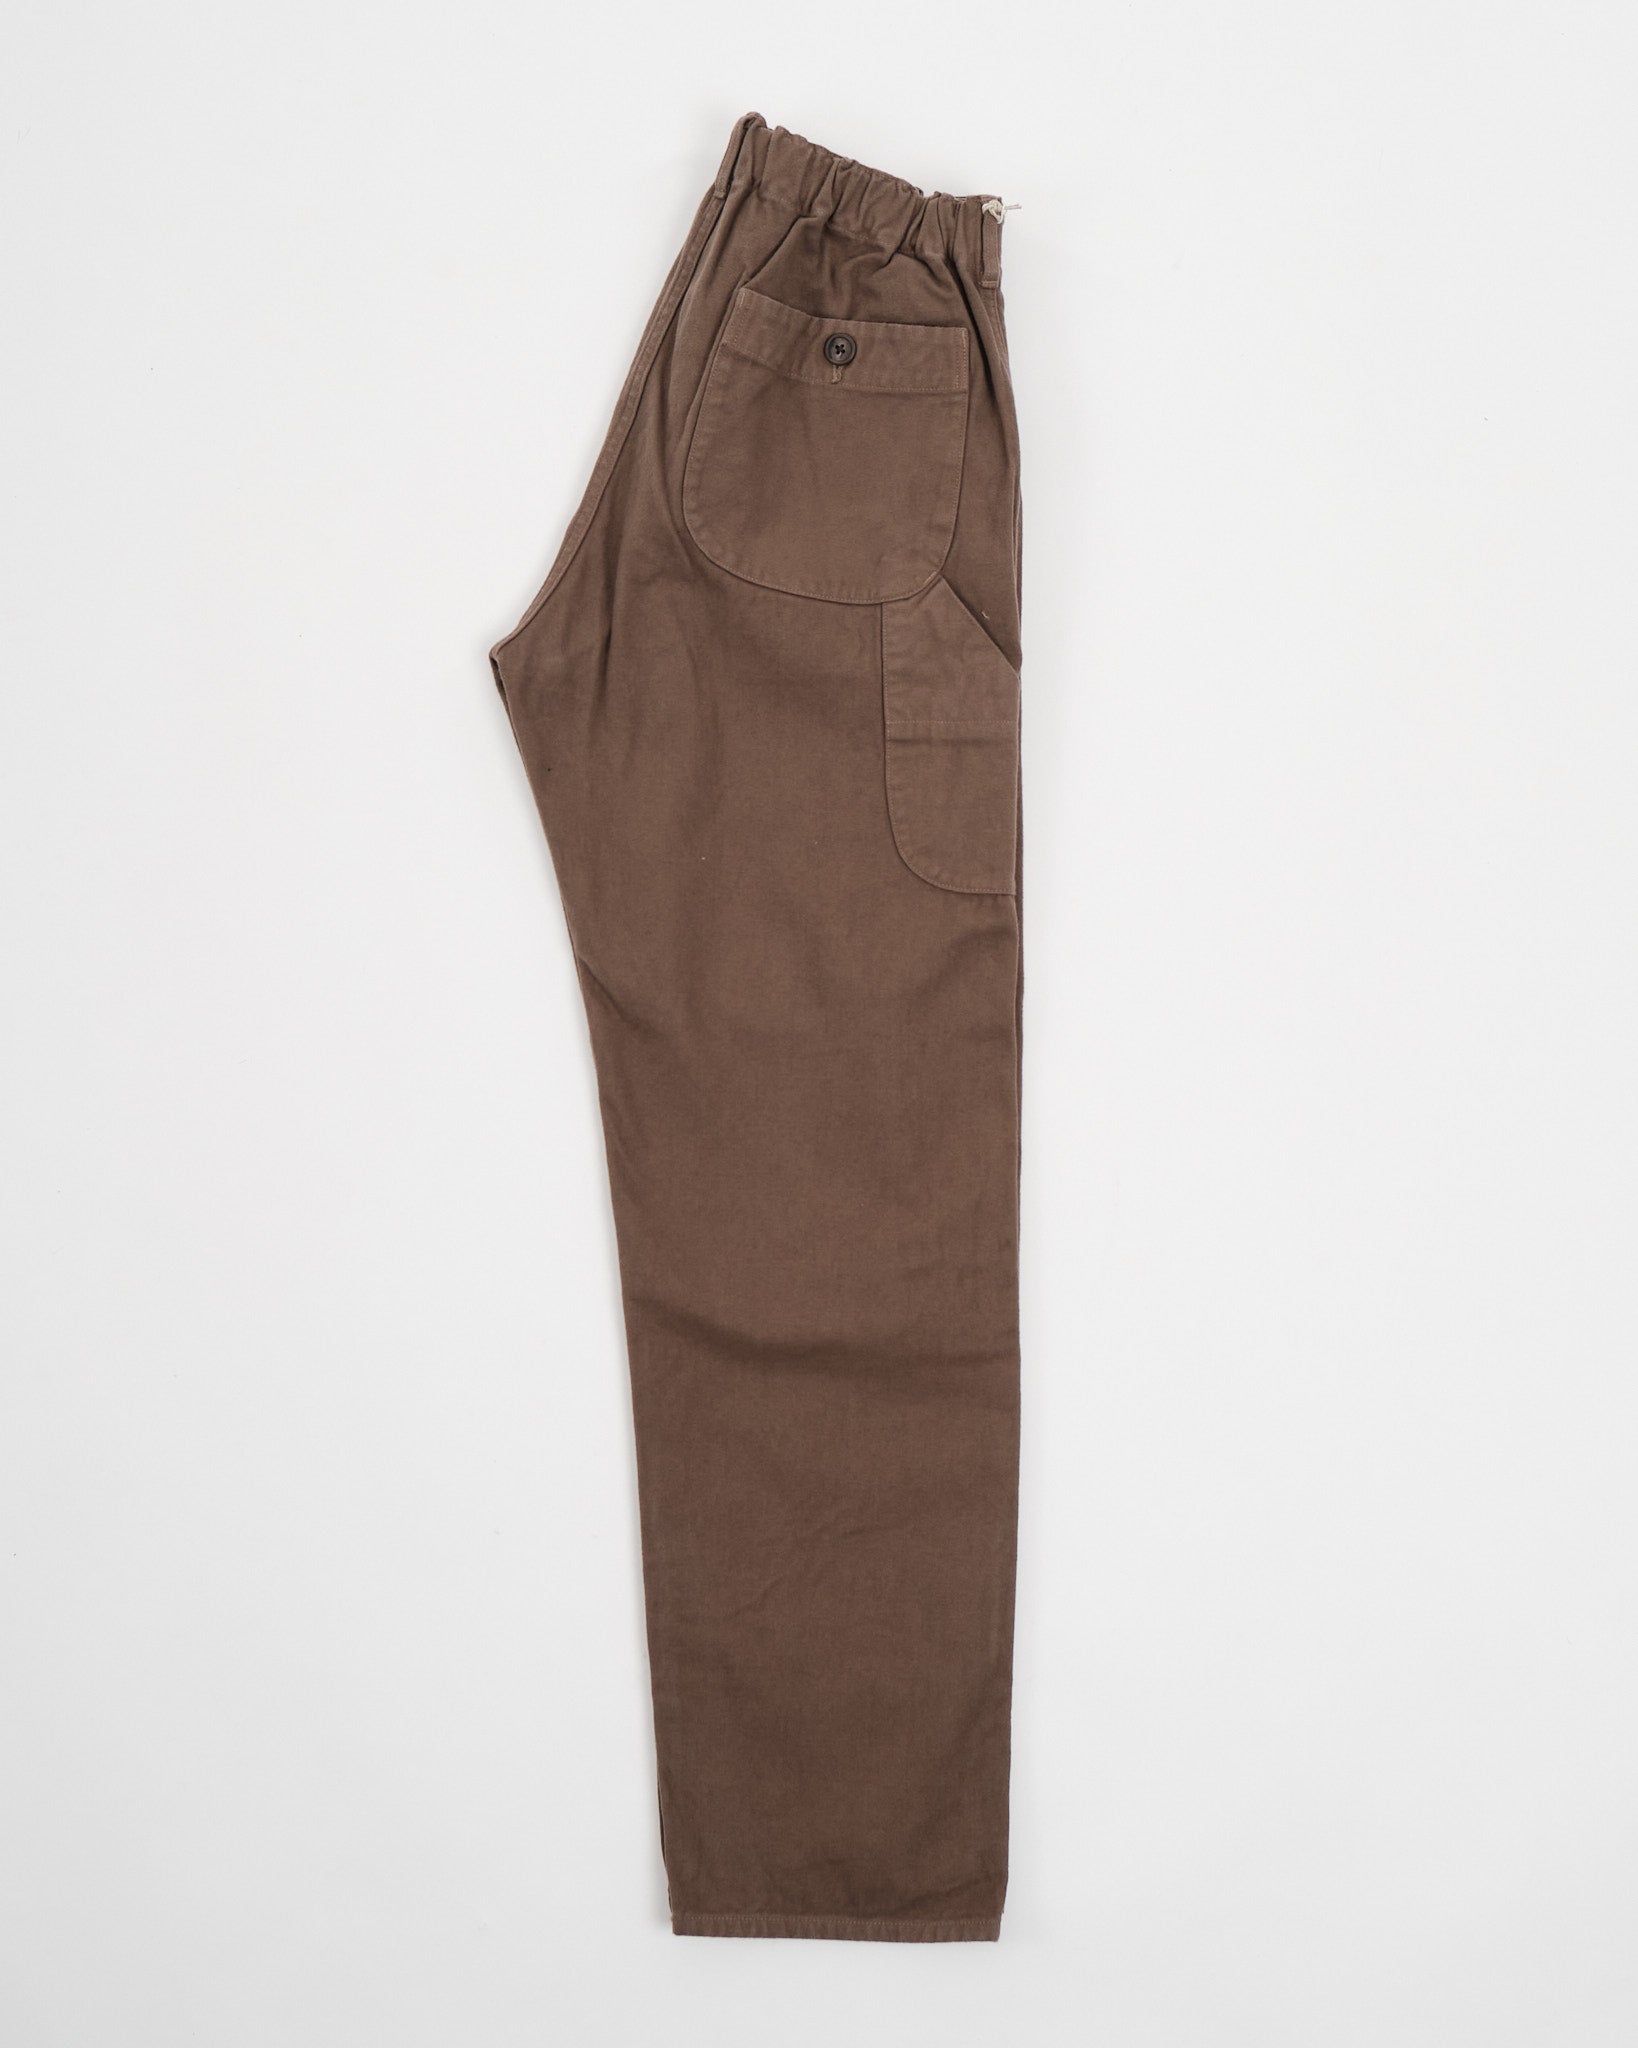 FRENCH WORK PANTS ROSE GRAY - Meadow